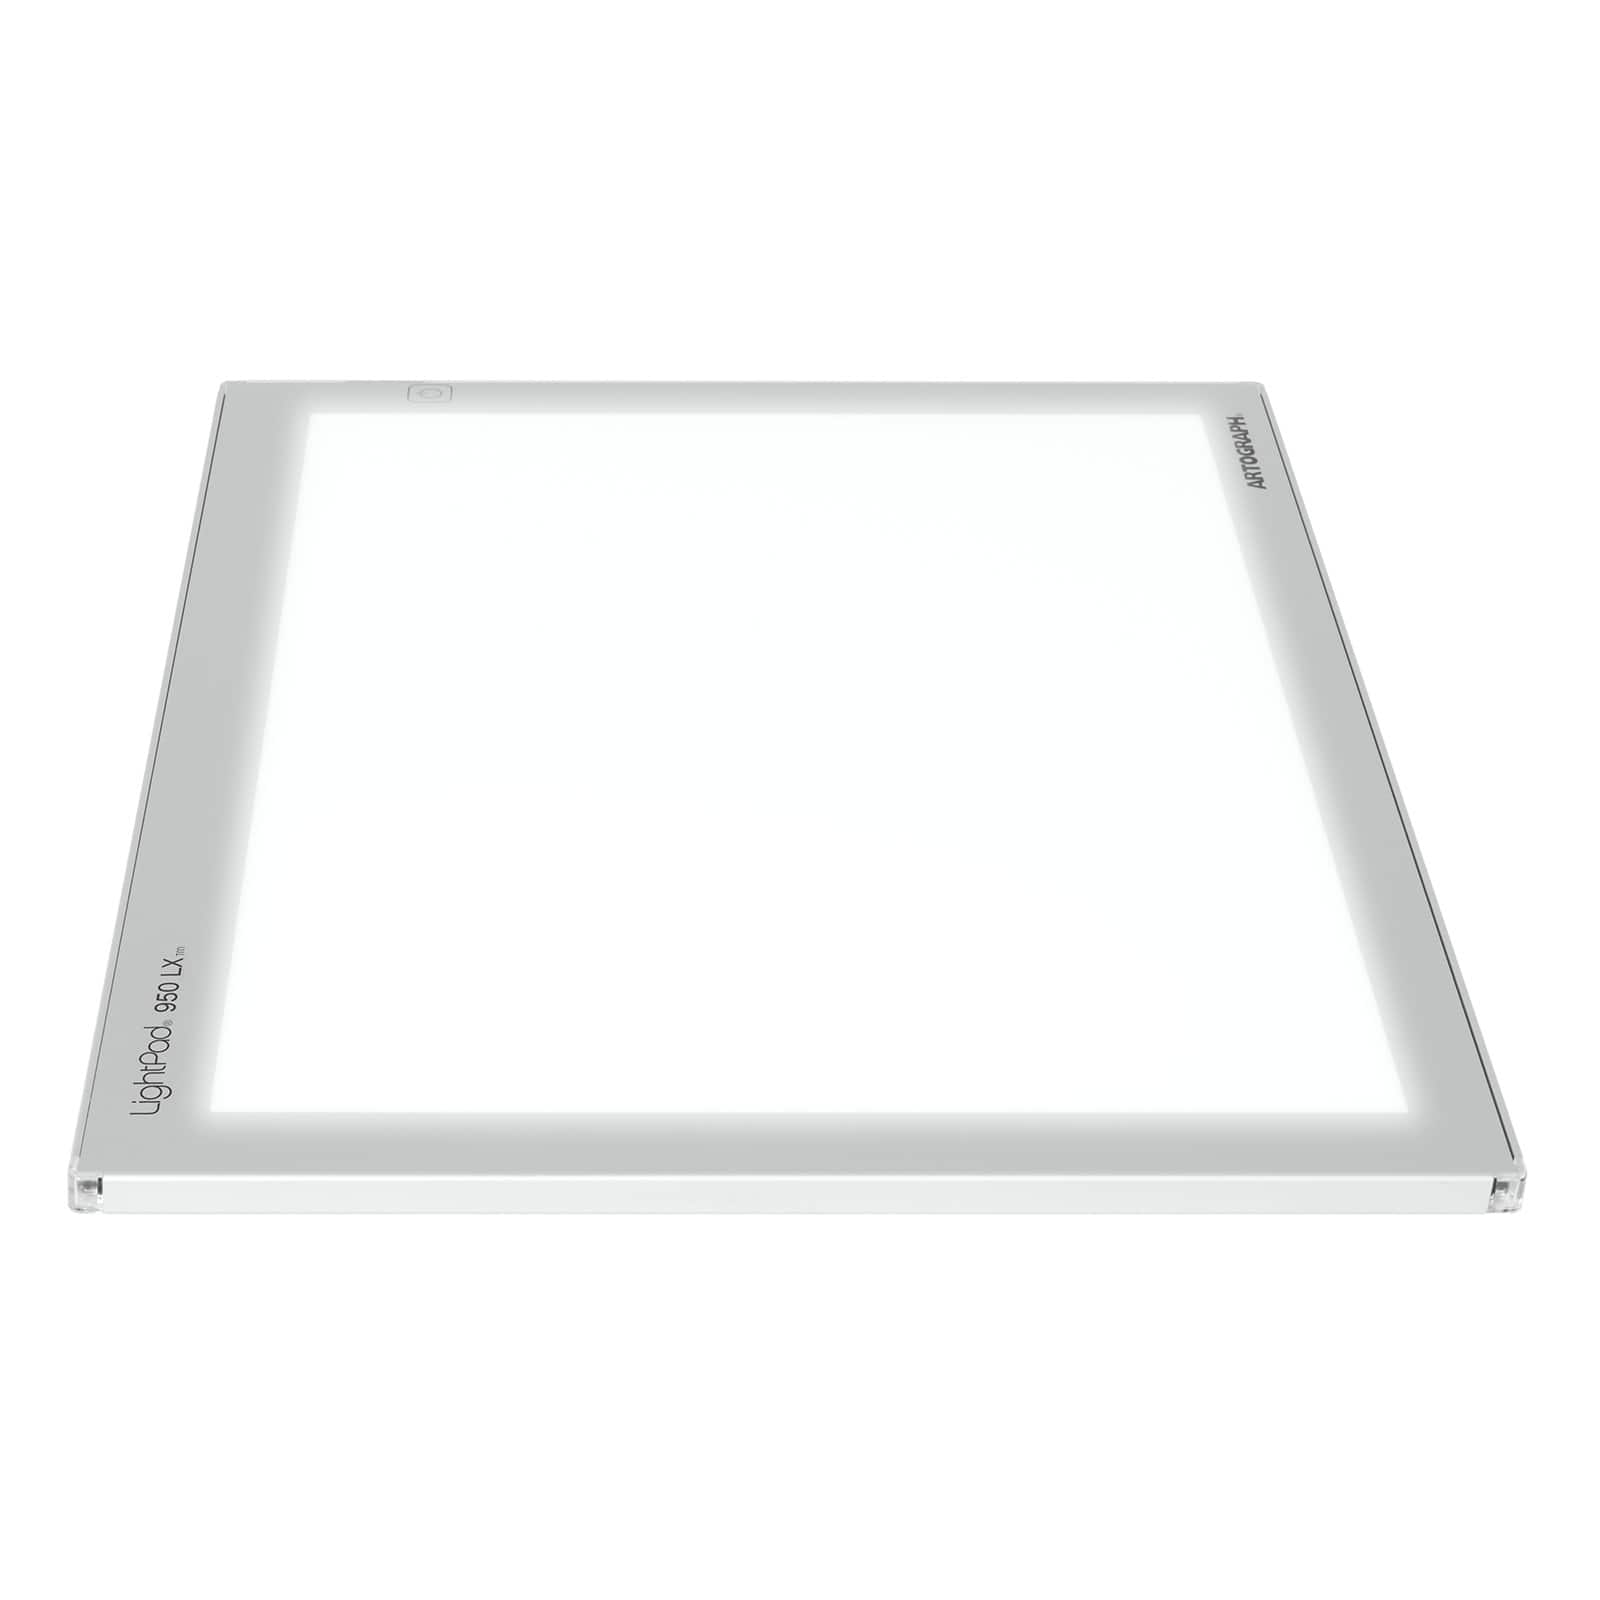 Artograph LightPad 950 LX - 24 x 17 Thin, Dimmable LED Light Box for  Tracing, Drawing